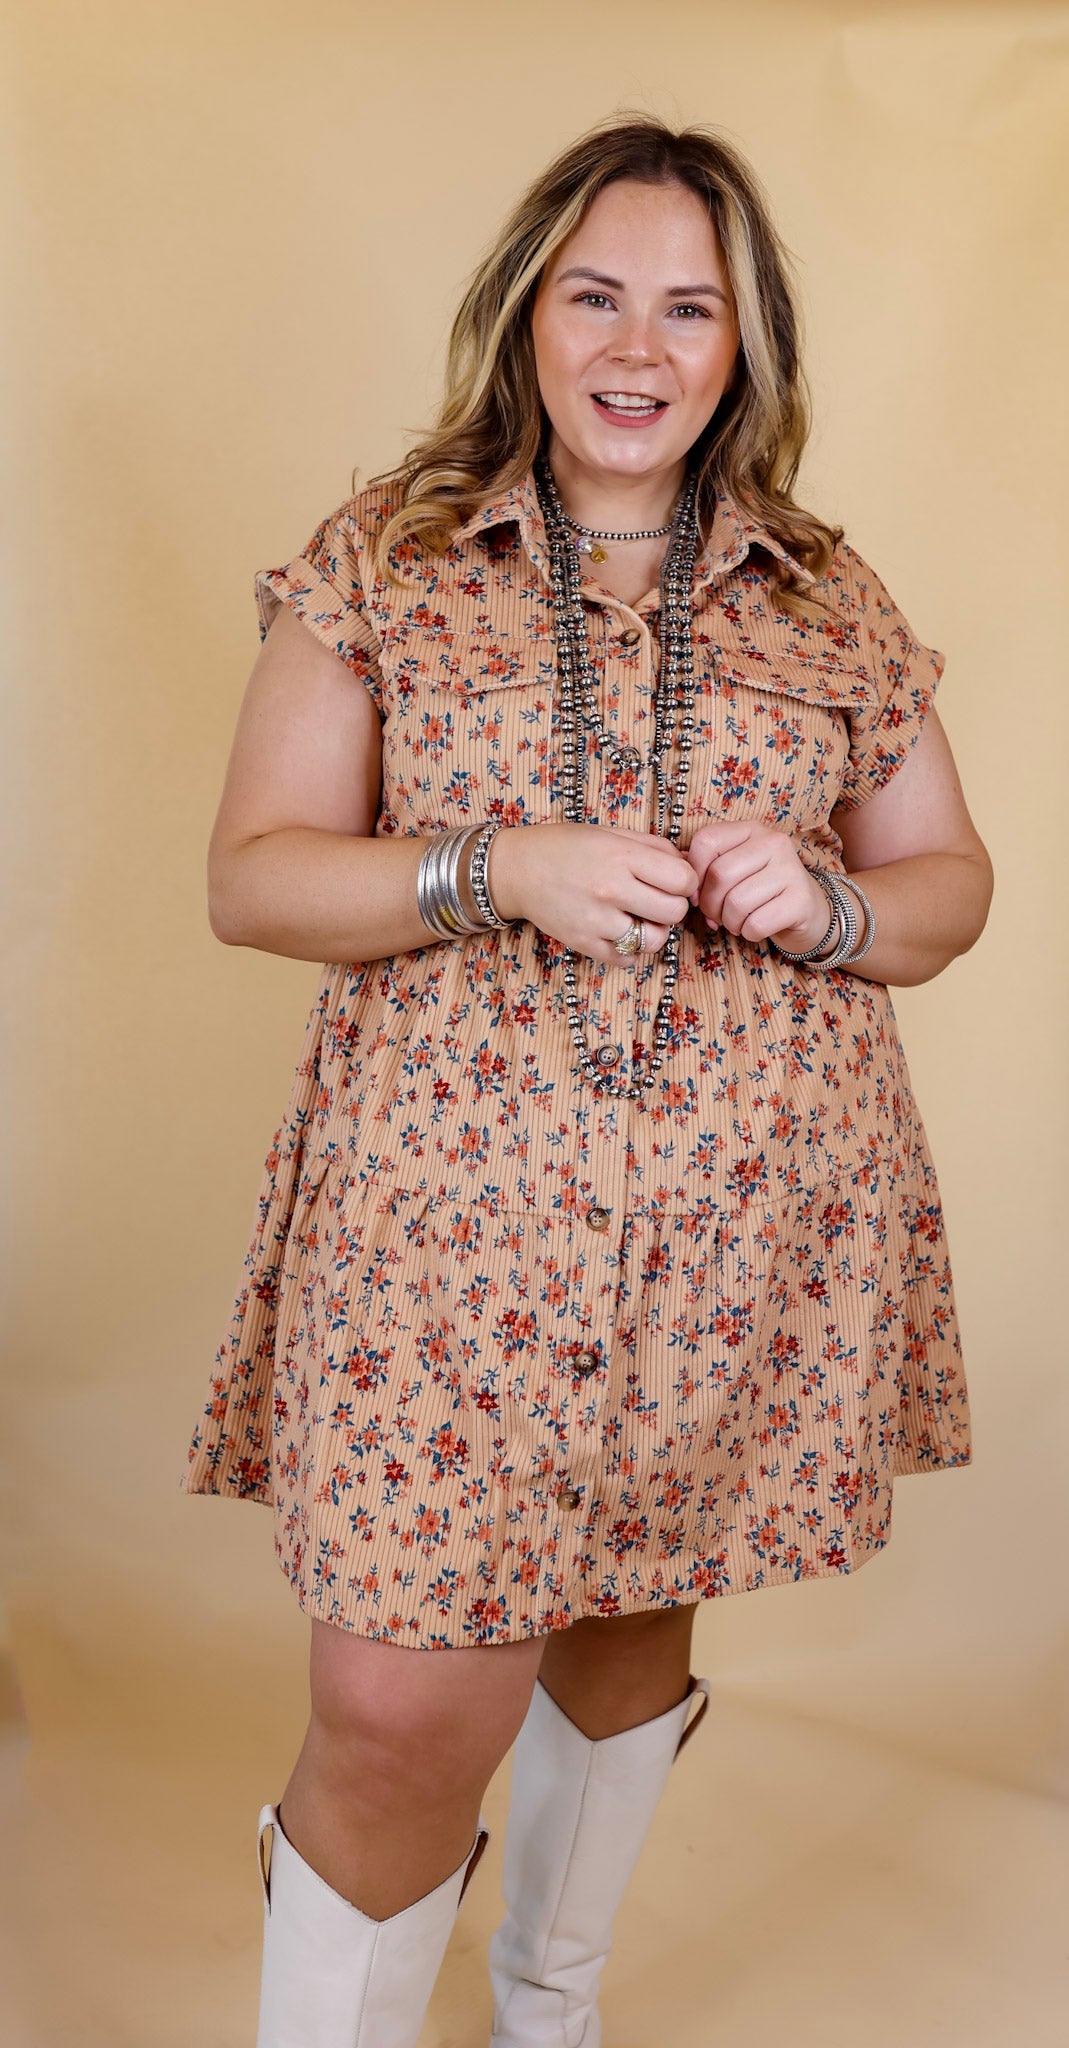 Latest Obsession Button Up Floral Corduroy Dress in Tan - Giddy Up Glamour Boutique